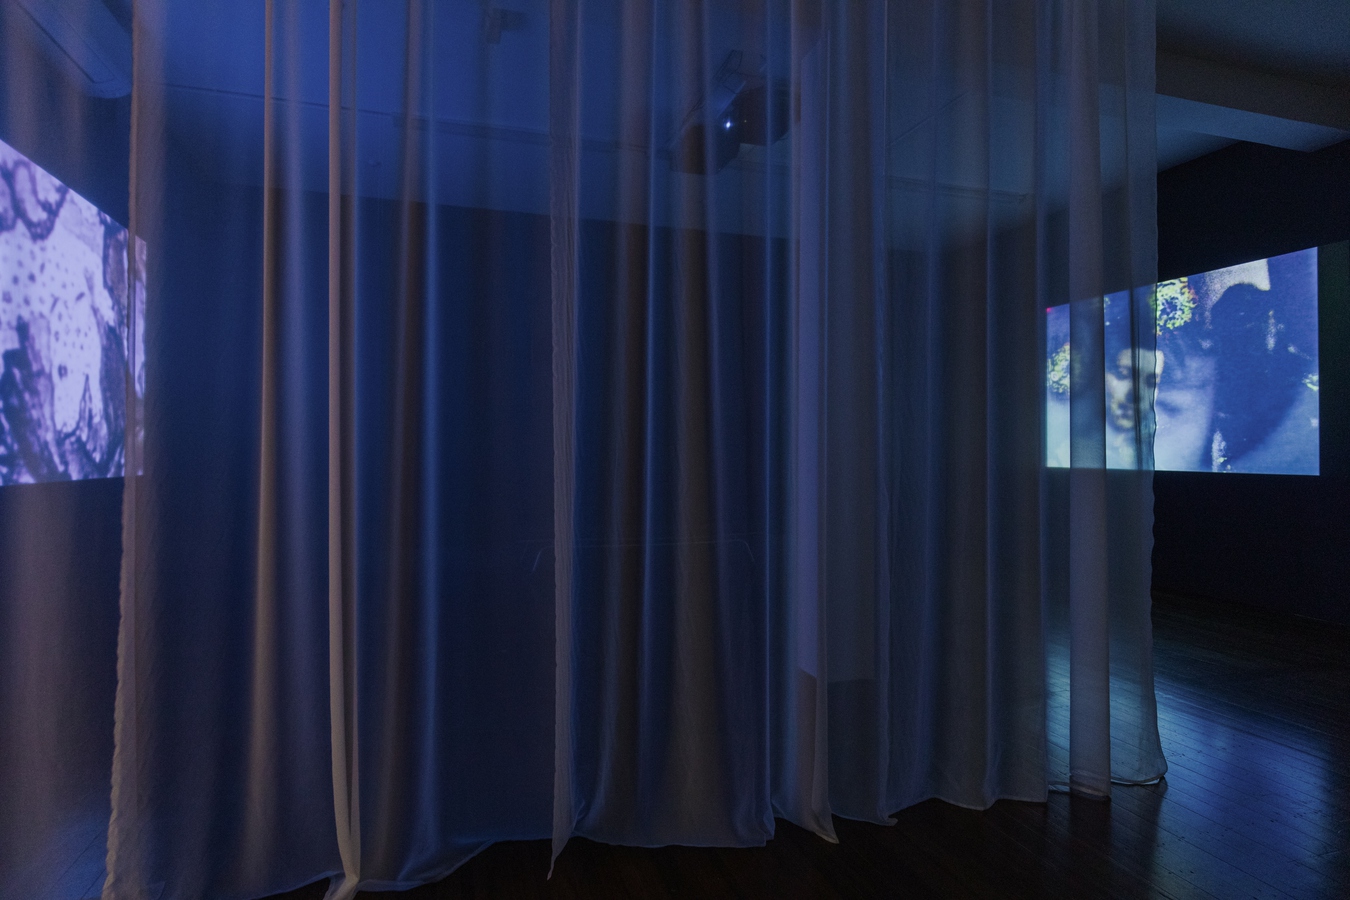 Image: Selina Ershadi, چشم چشمه (installation view), 2023. Two-channel video projection. 8:15 mins. Sound design by Frances Libeau. Photo by Nancy Zhou.